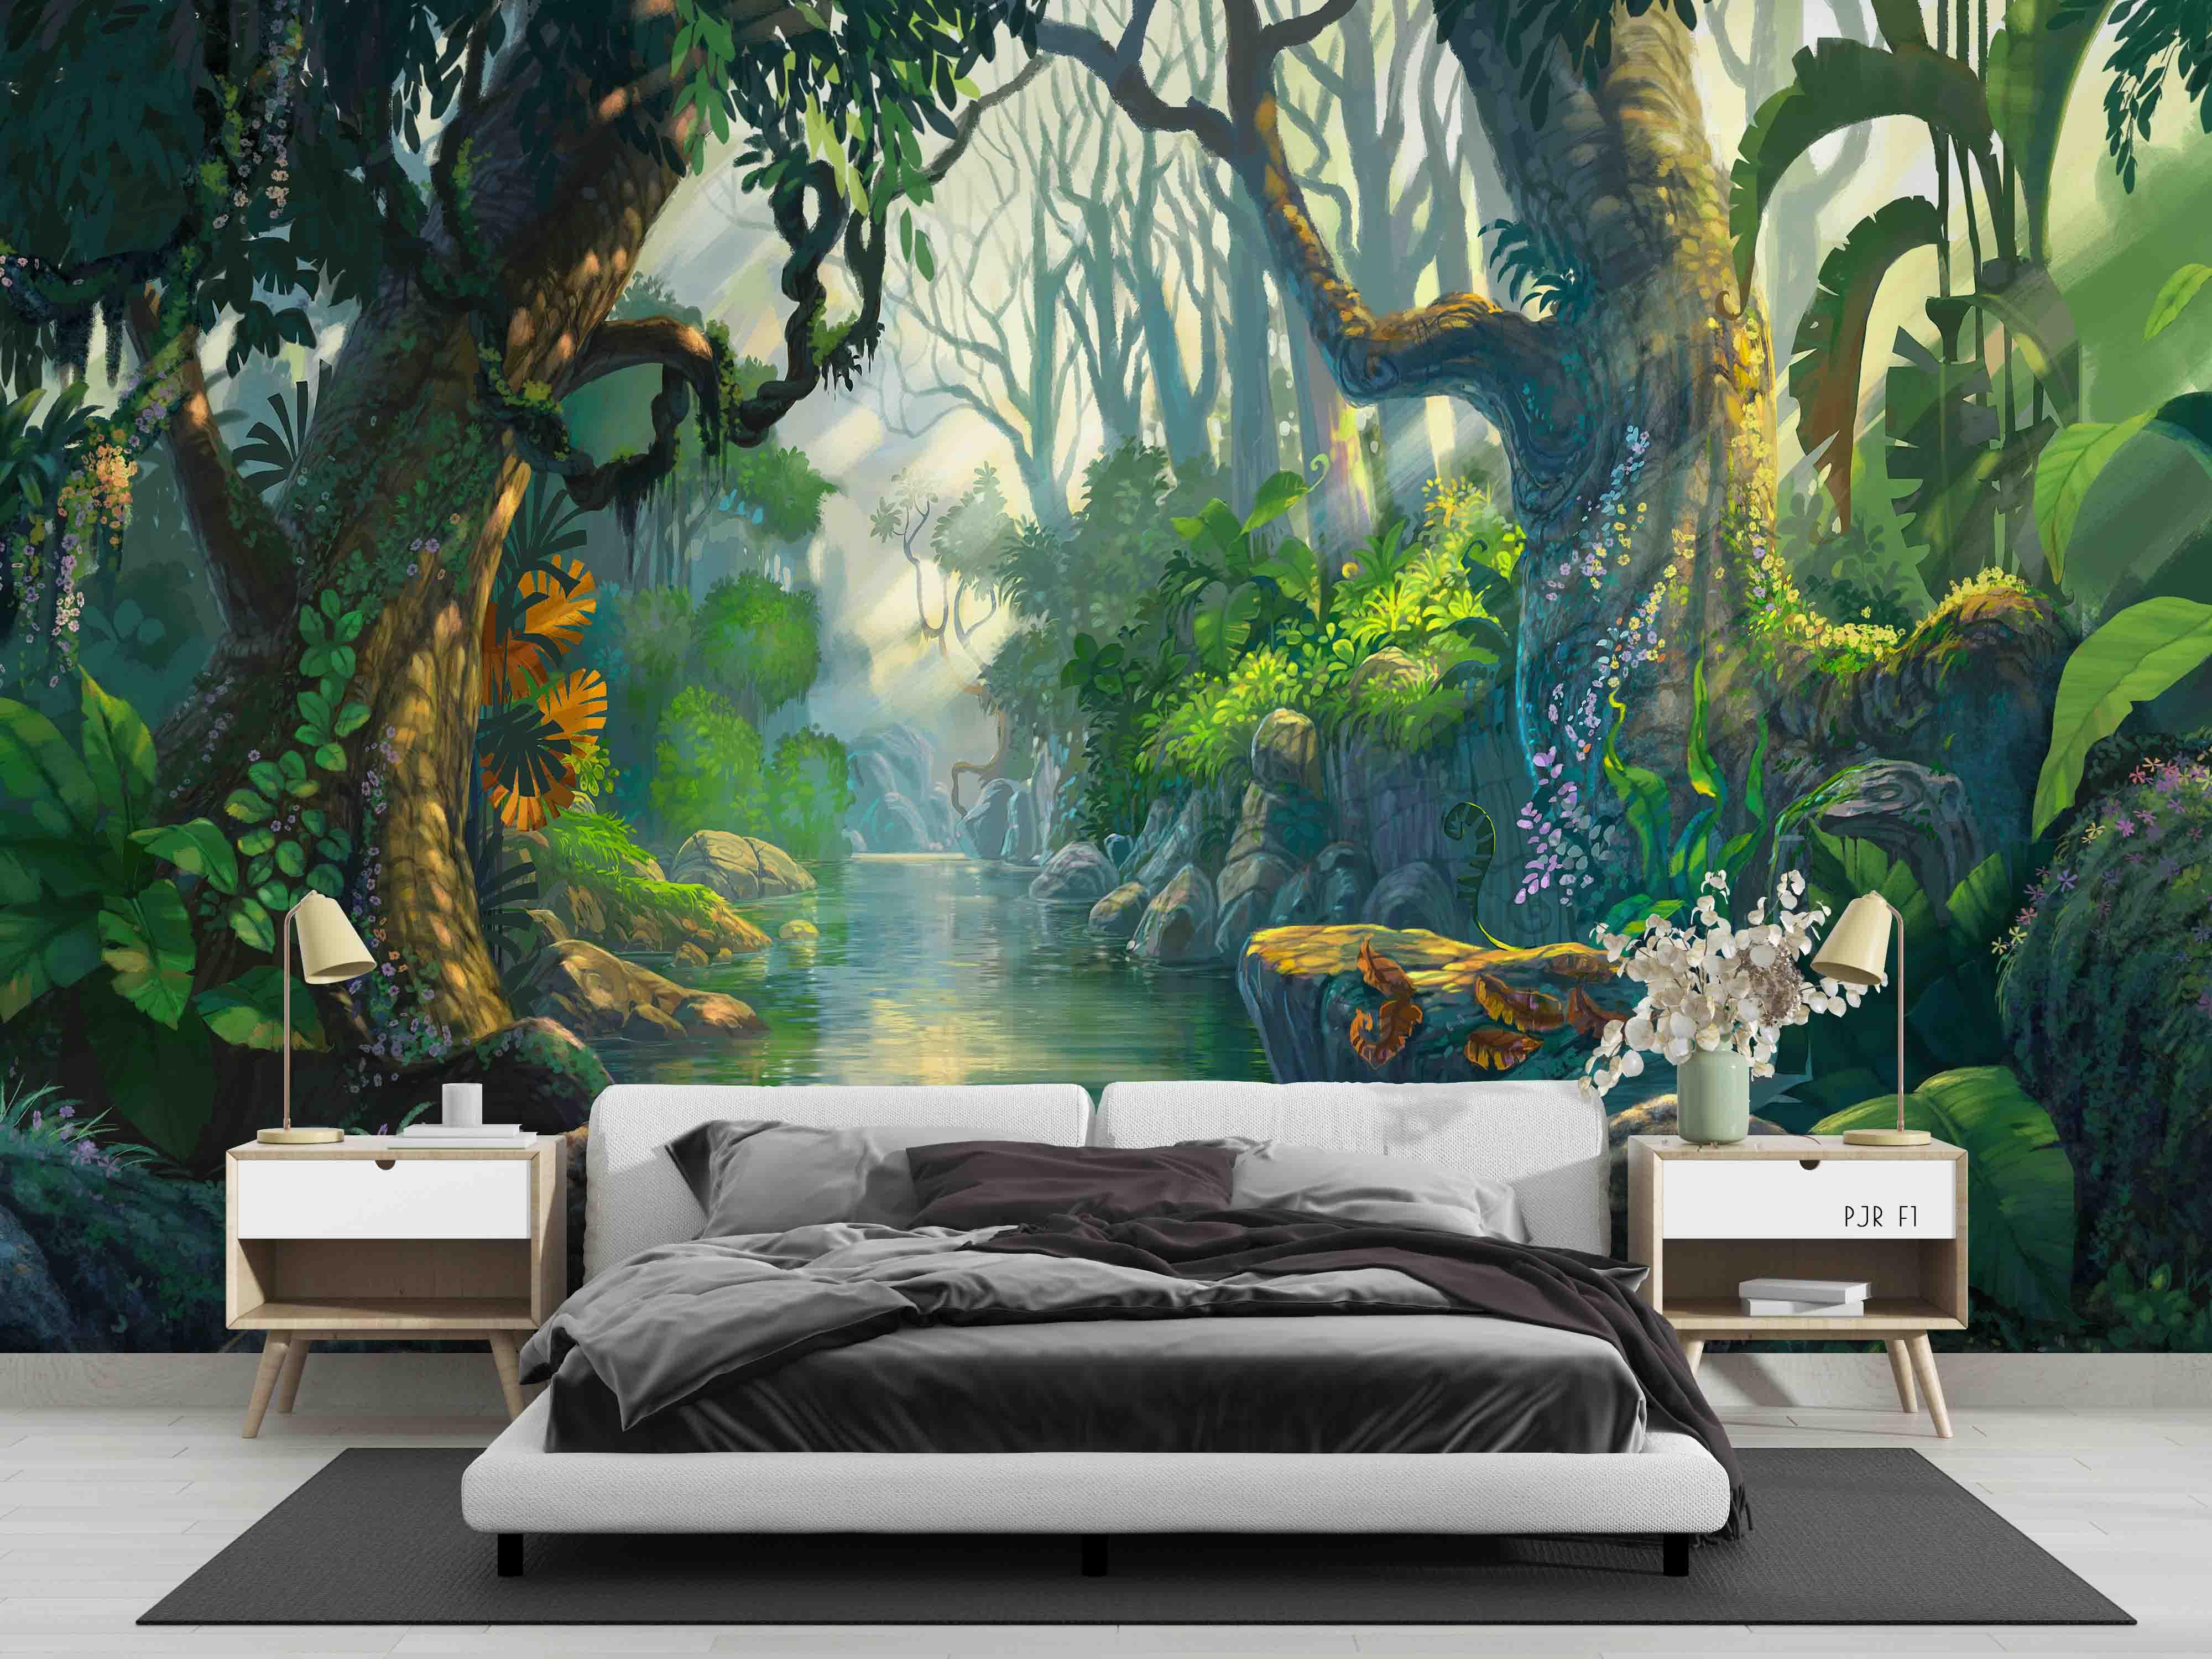 3D Painting Forest Plant Wall Mural Wallpaper WJ 2094- Jess Art Decoration